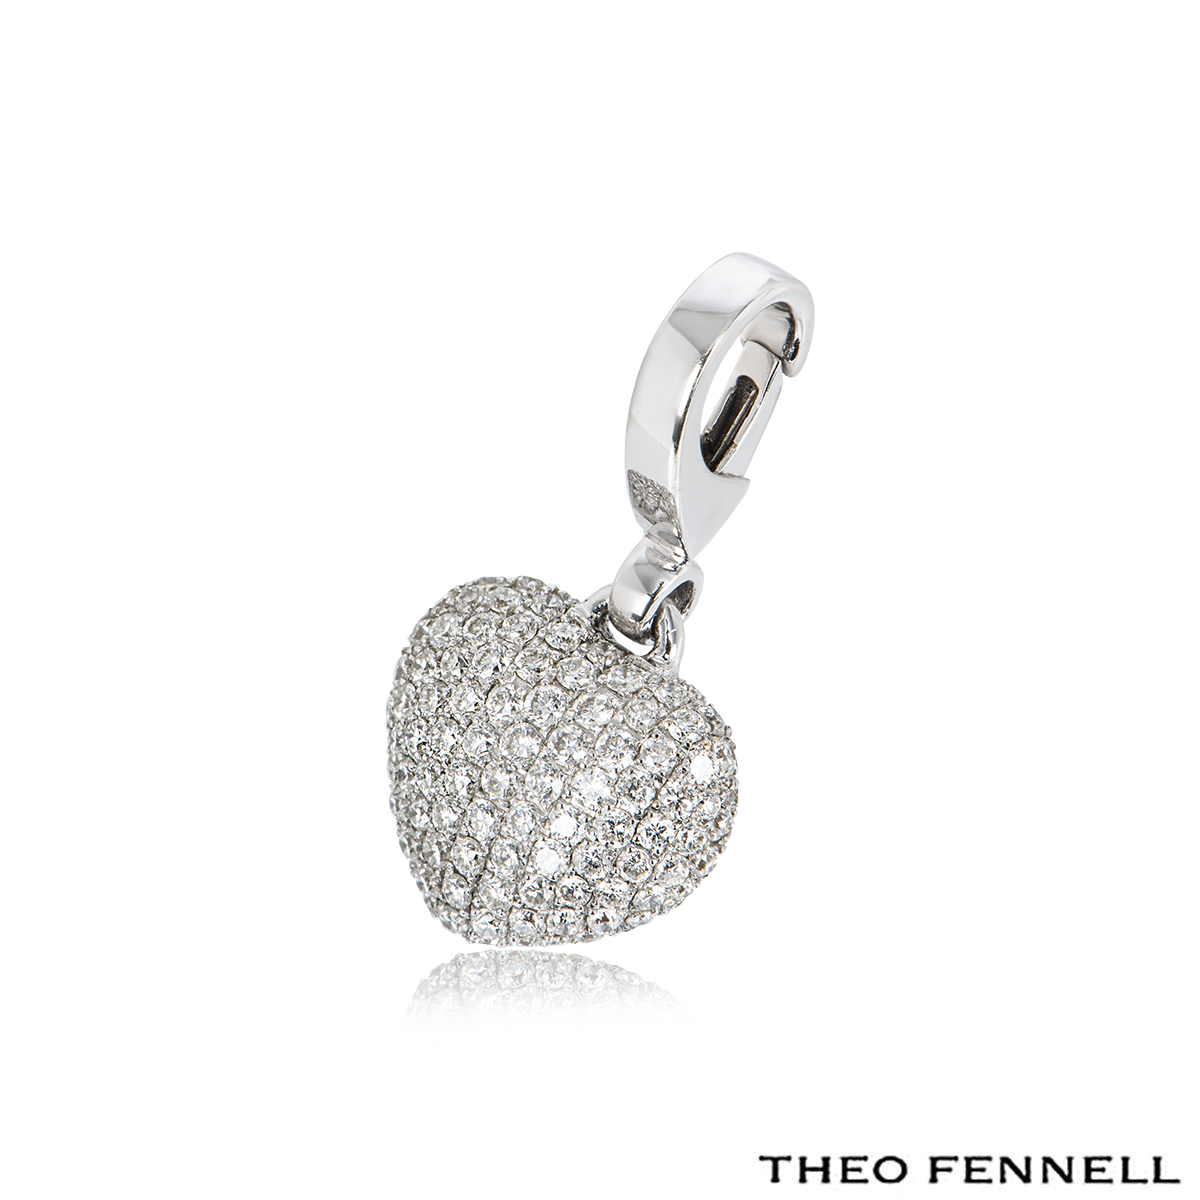 Theo Fennell White Gold Diamond Heart Charm